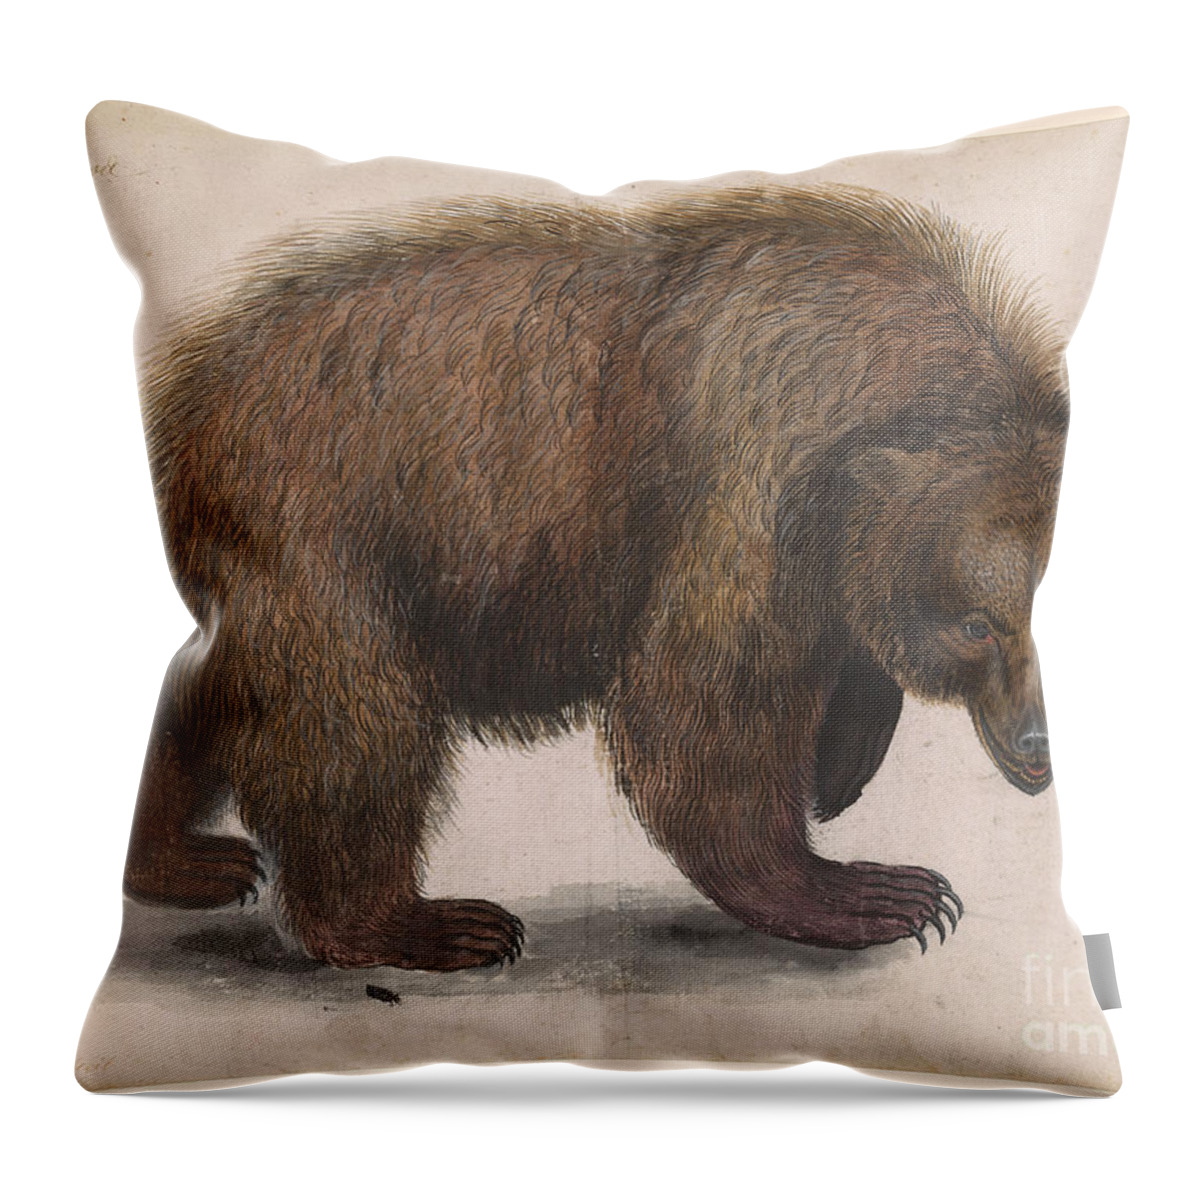 Attributed To Anselmus De Boodt 1550-1632 Bear Throw Pillow featuring the painting Bear #1 by Celestial Images